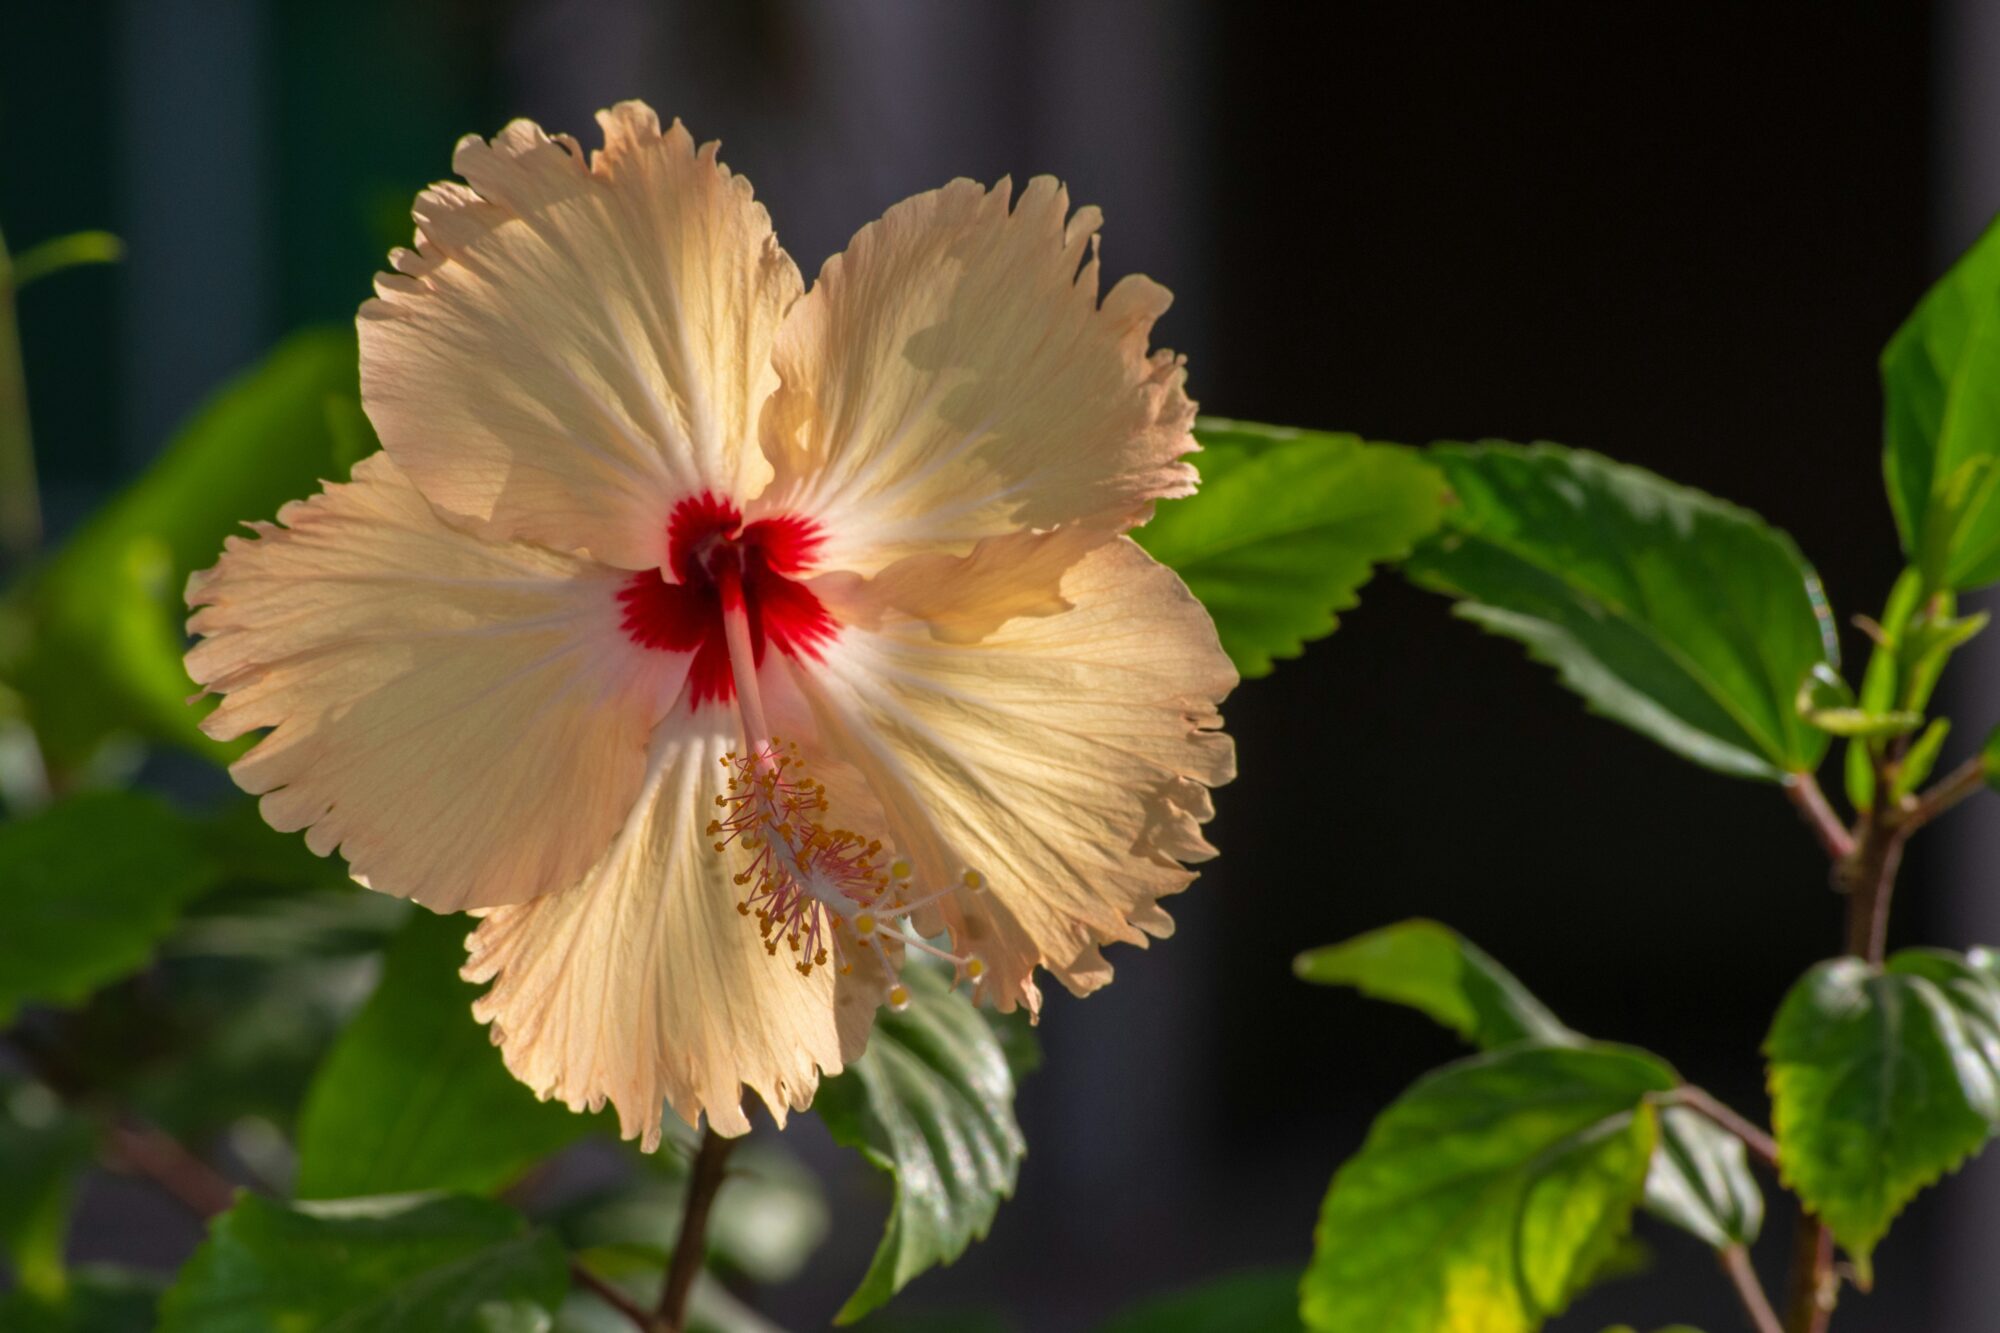 A cream-colored hibiscus with a striking red core, presenting a unique and unusual contrast of colors in plant life.